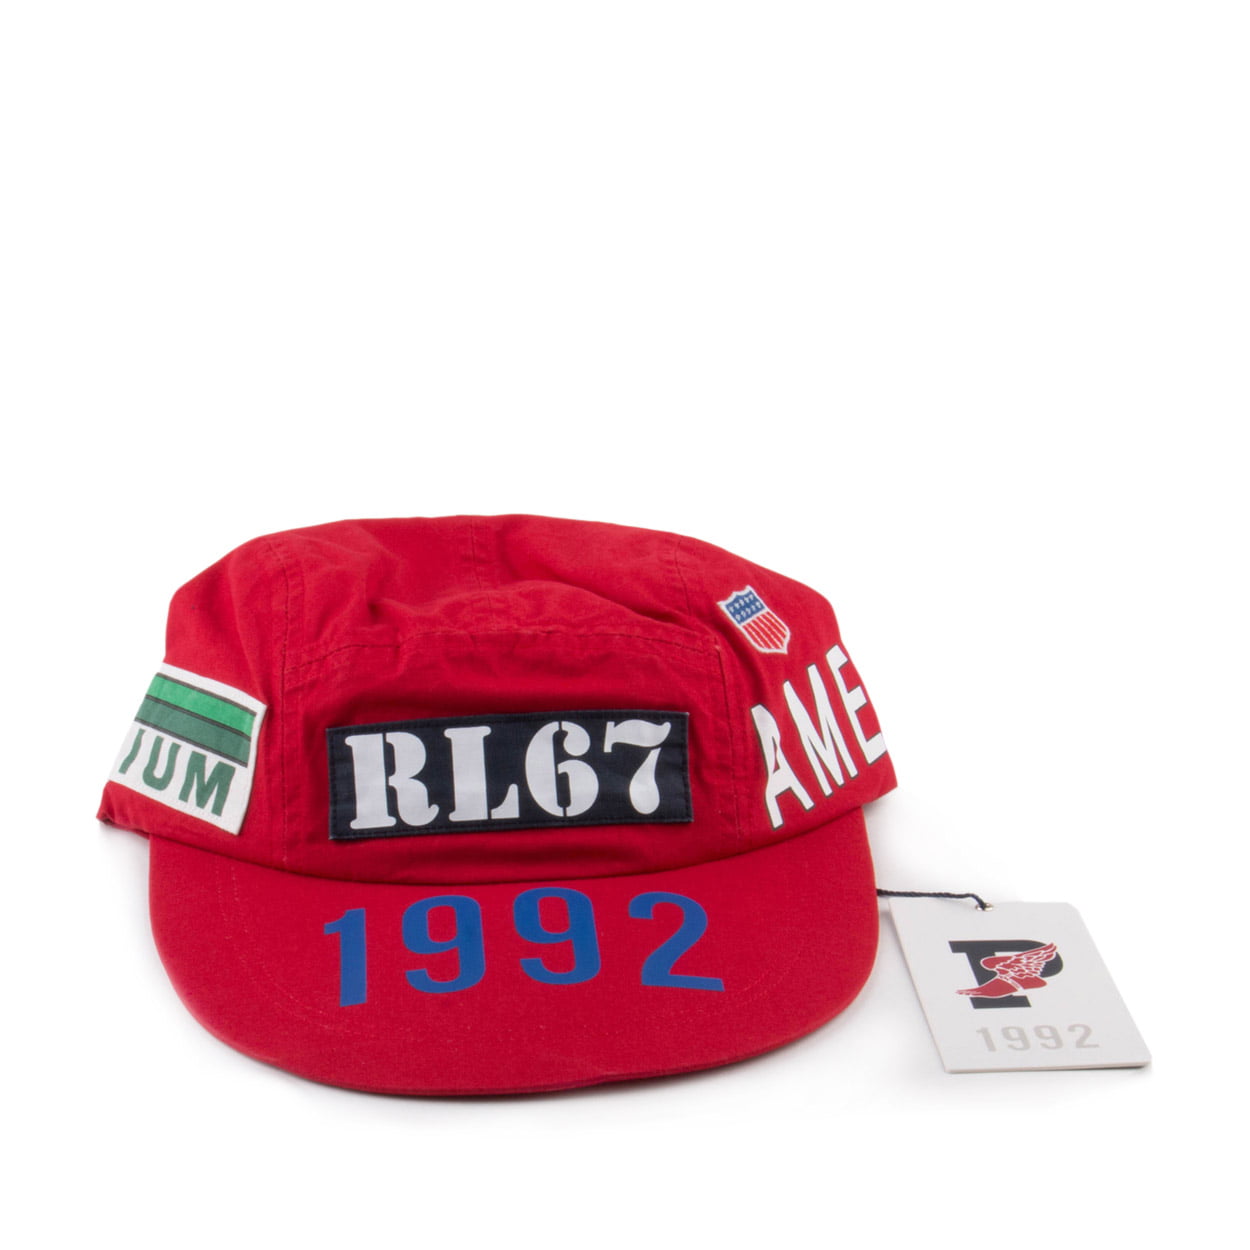 Ralph Lauren Polo Stadium Collection 1992 P-Wing Ralph Red Limited Hat L/XL  RARE